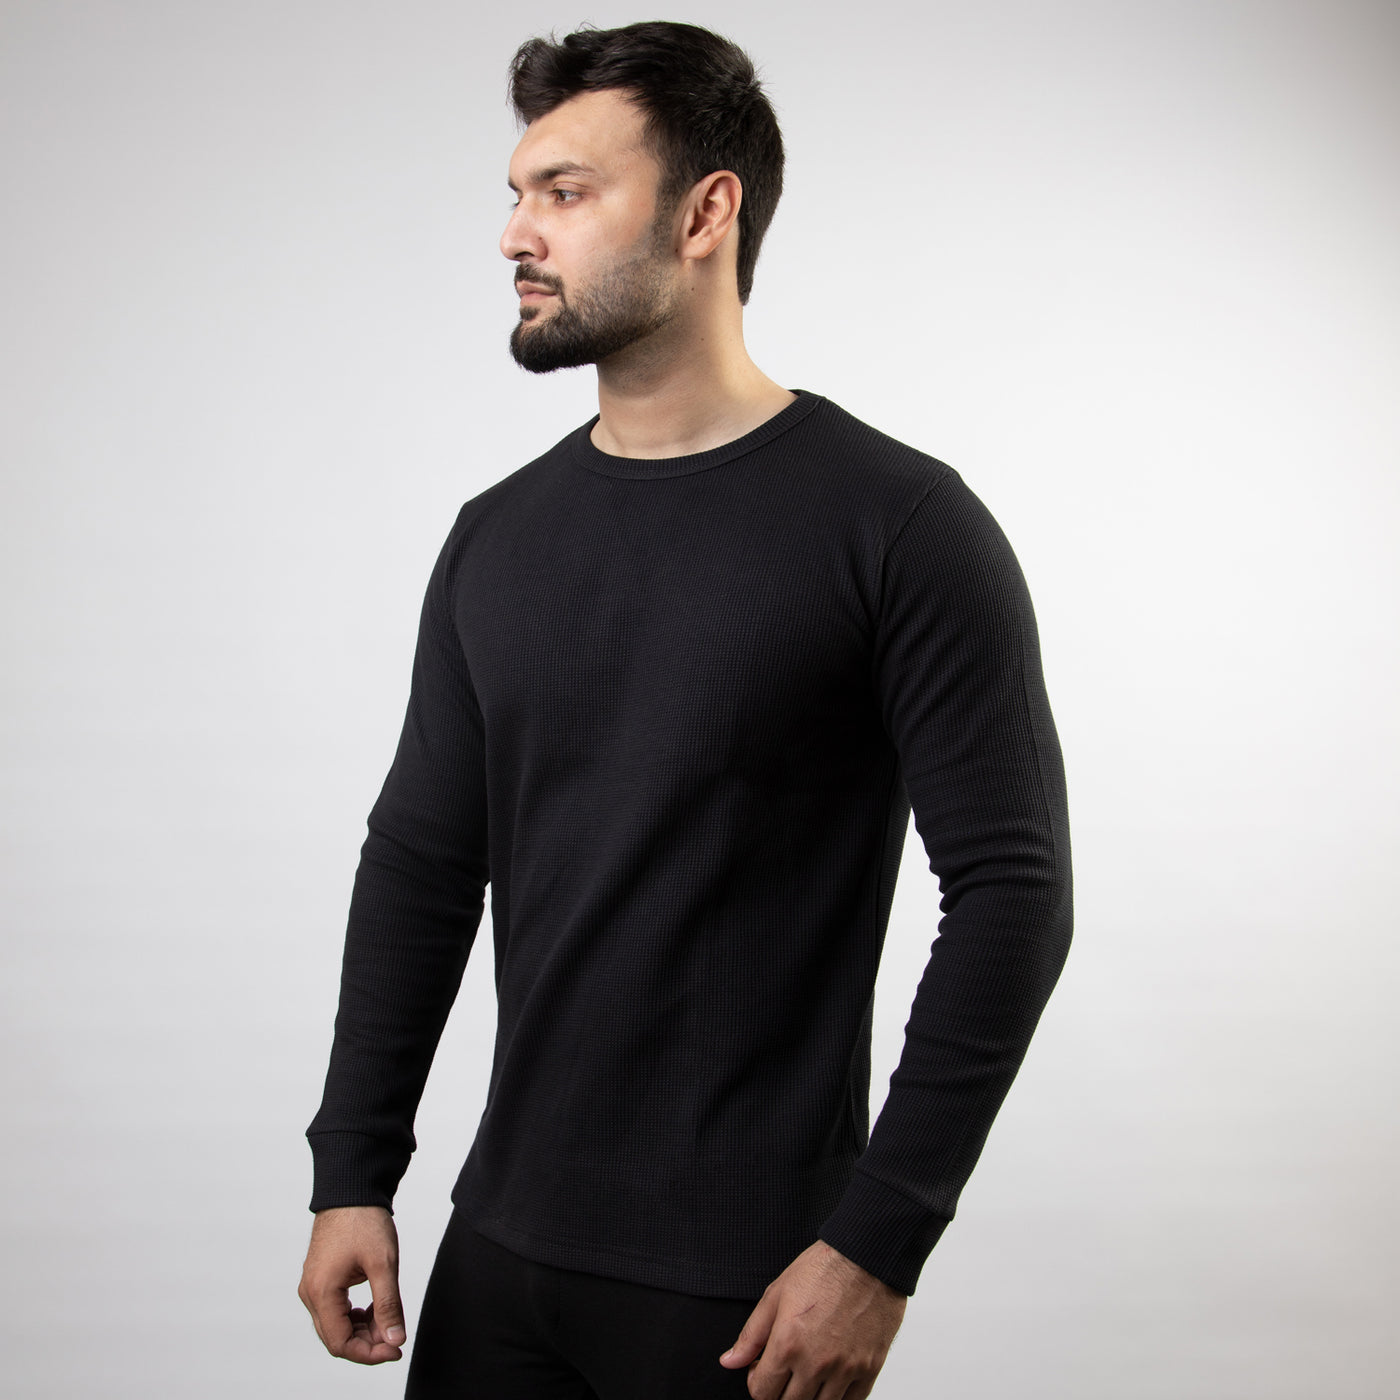 Black Thermal Full Sleeves Waffle-Knit